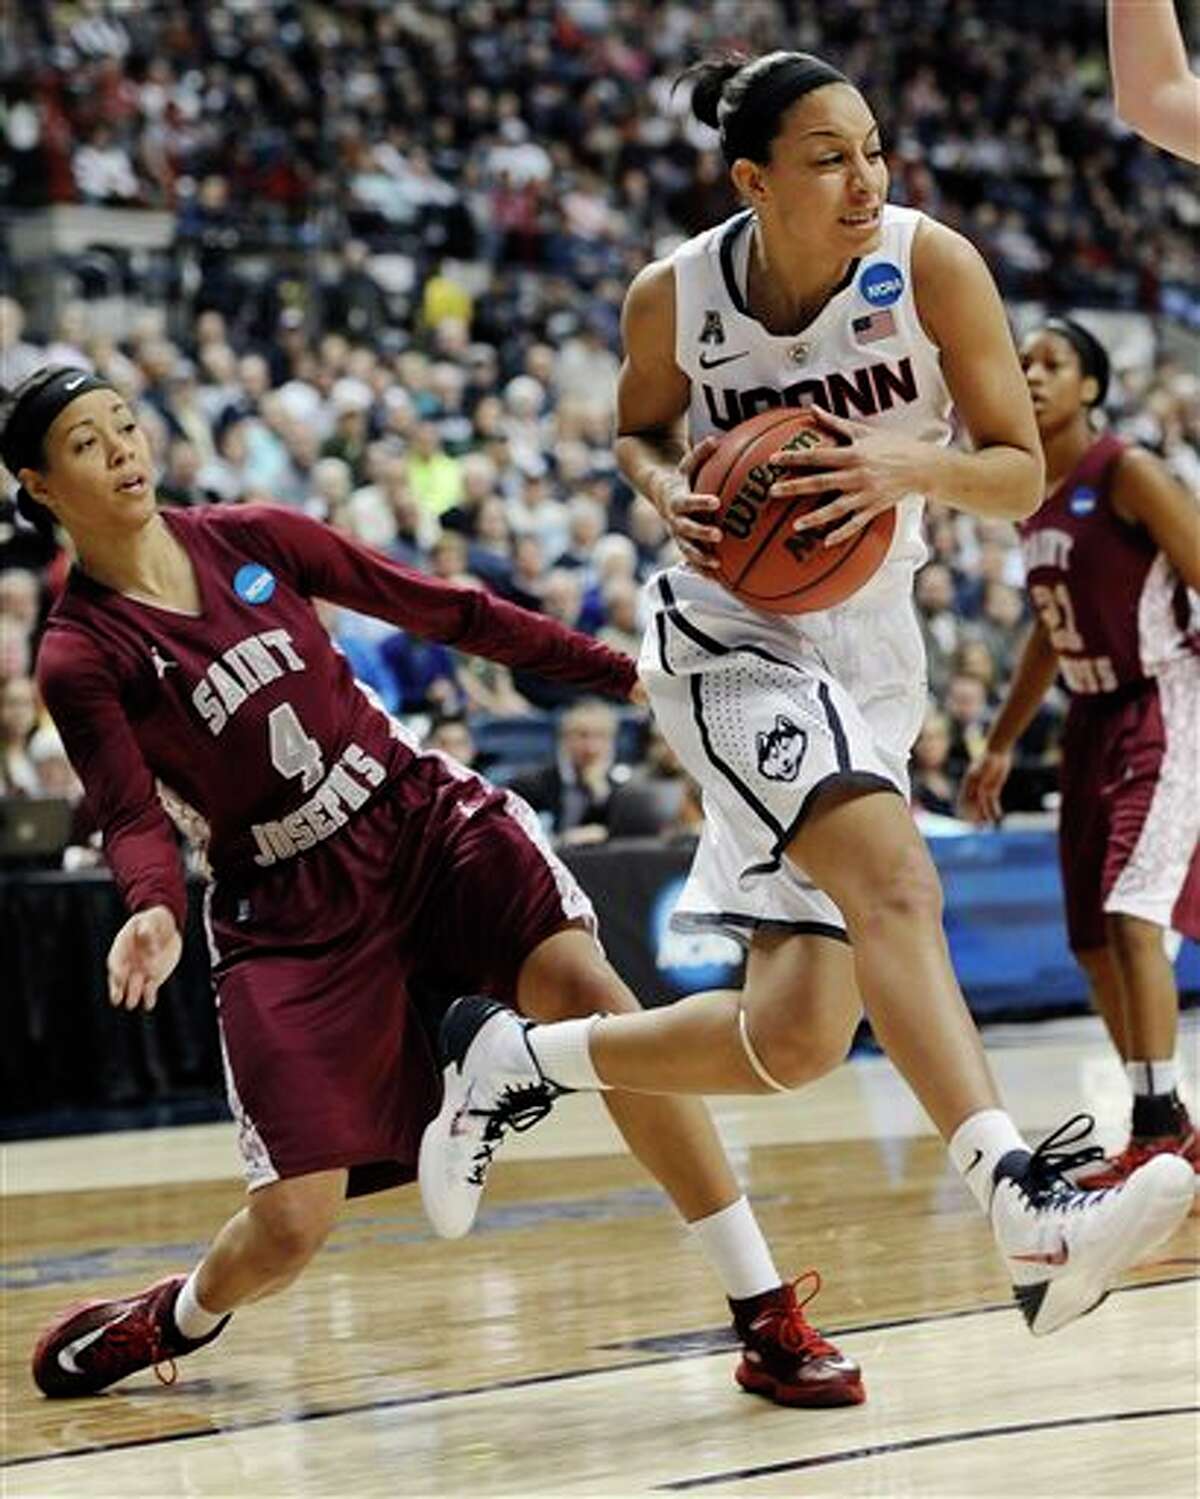 Connecticut's Bria Hartley, right, drives past Saint Joseph's Natasha Cloud, left, during the first half of a second-round game of the NCAA women's college basketball tournament, Tuesday, March 25, 2014, in Storrs, Conn. (AP Photo/Jessica Hill)